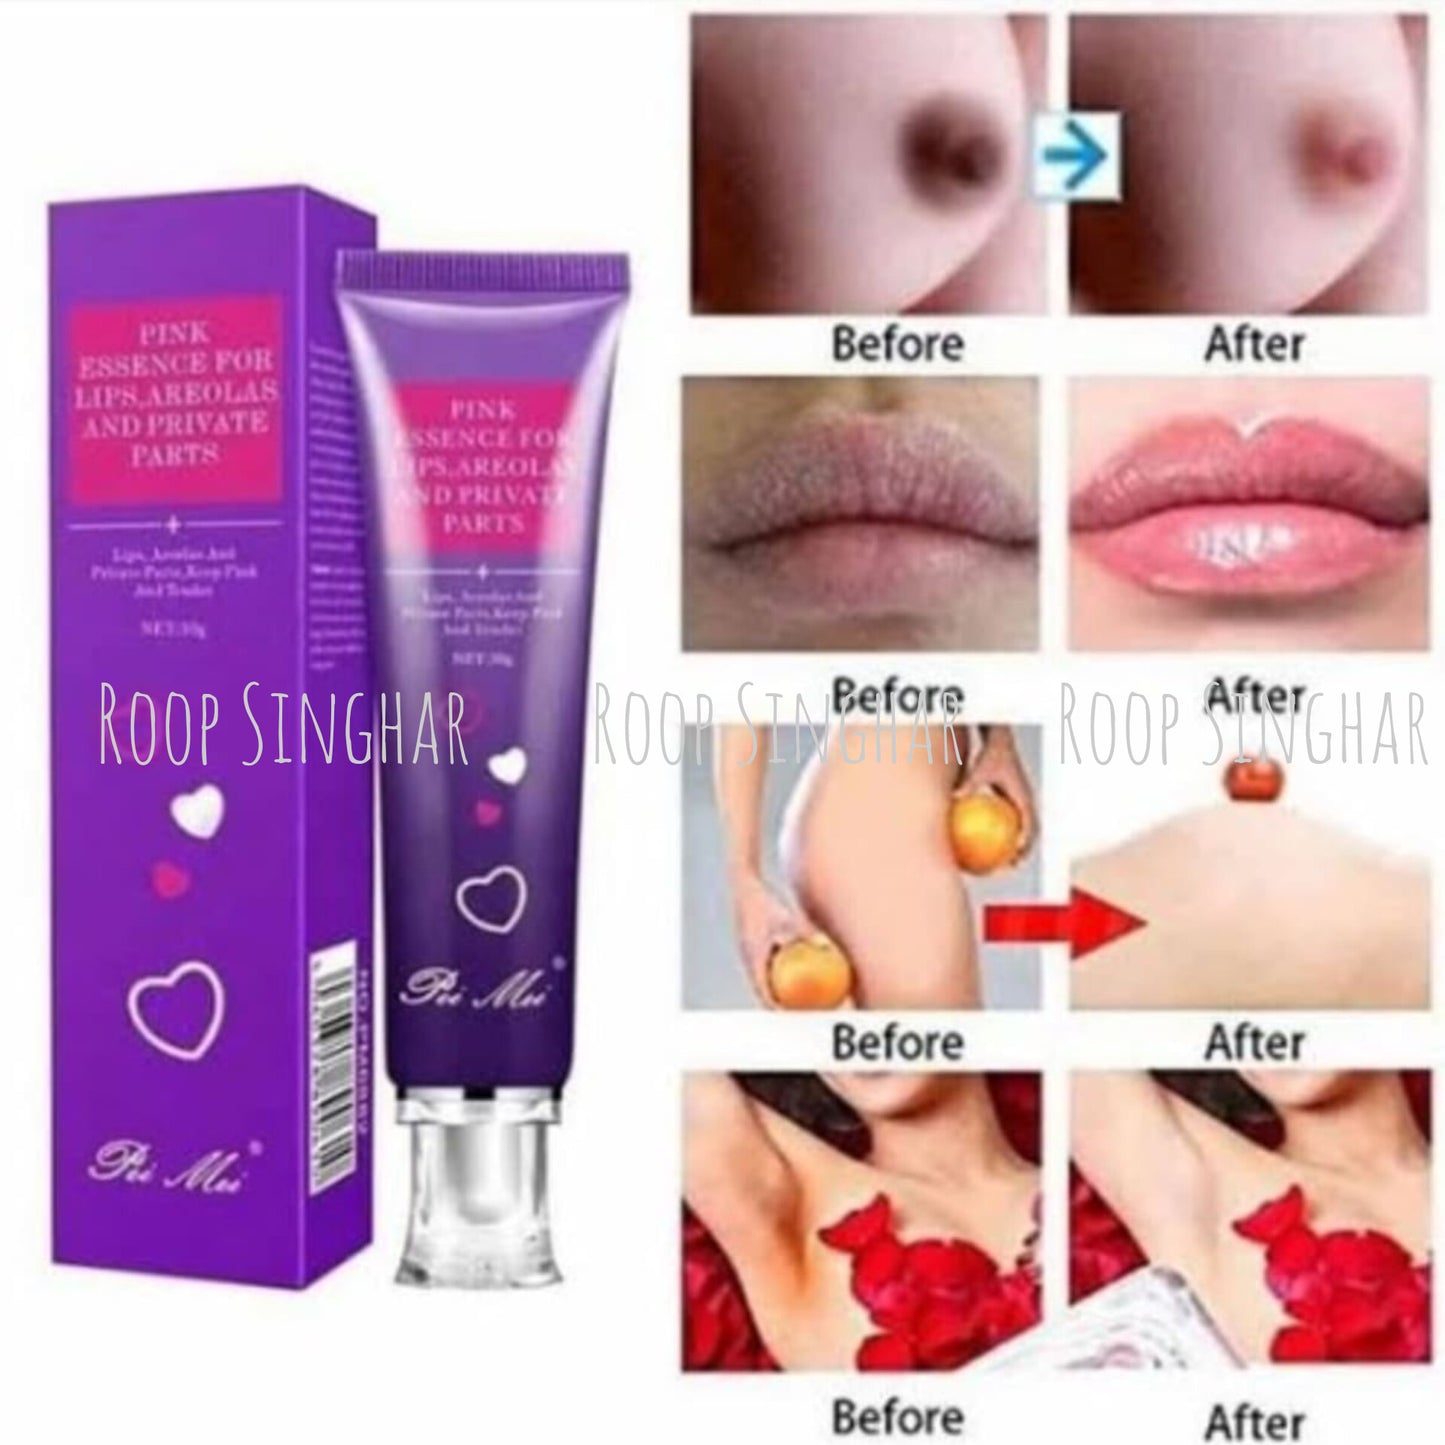 PINK ESSENCE FOR LIPS, AREOLAS AND PRIVATE PARTS Keep pink and Tender (30g)